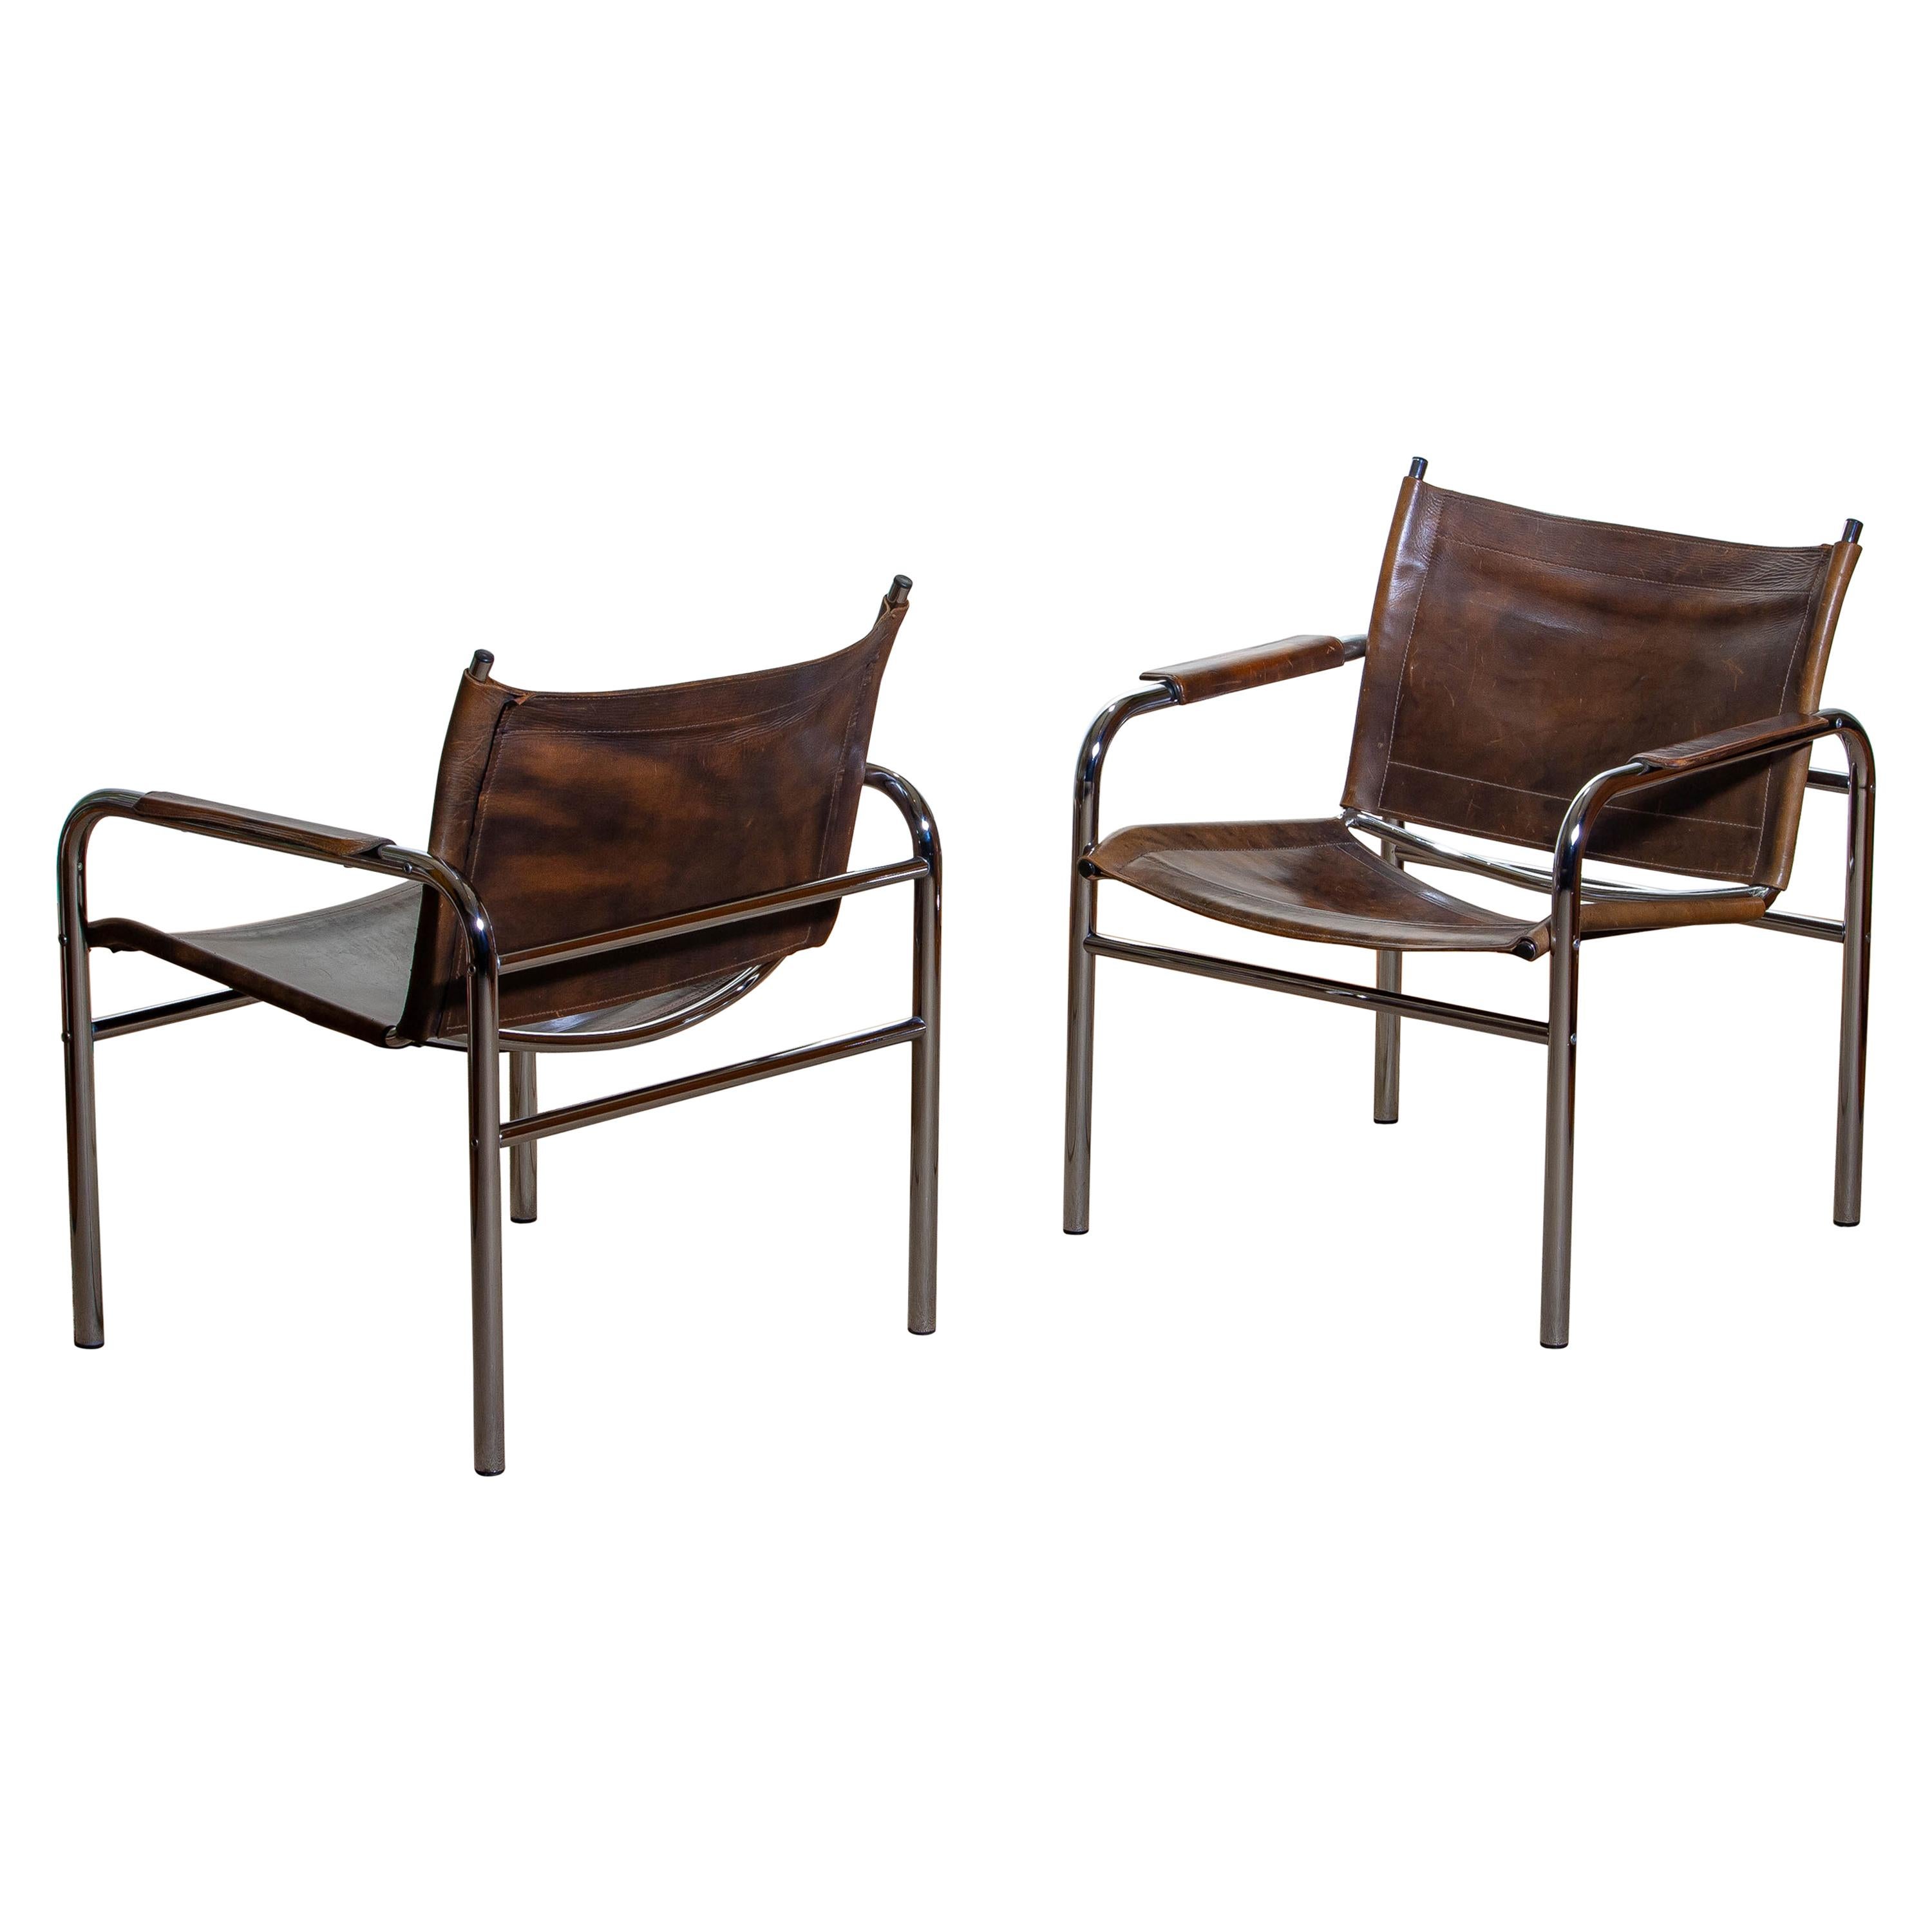 1980s, Pair of Leather and Tubular Steel Armchairs by Tord Bjorklund, Sweden 6